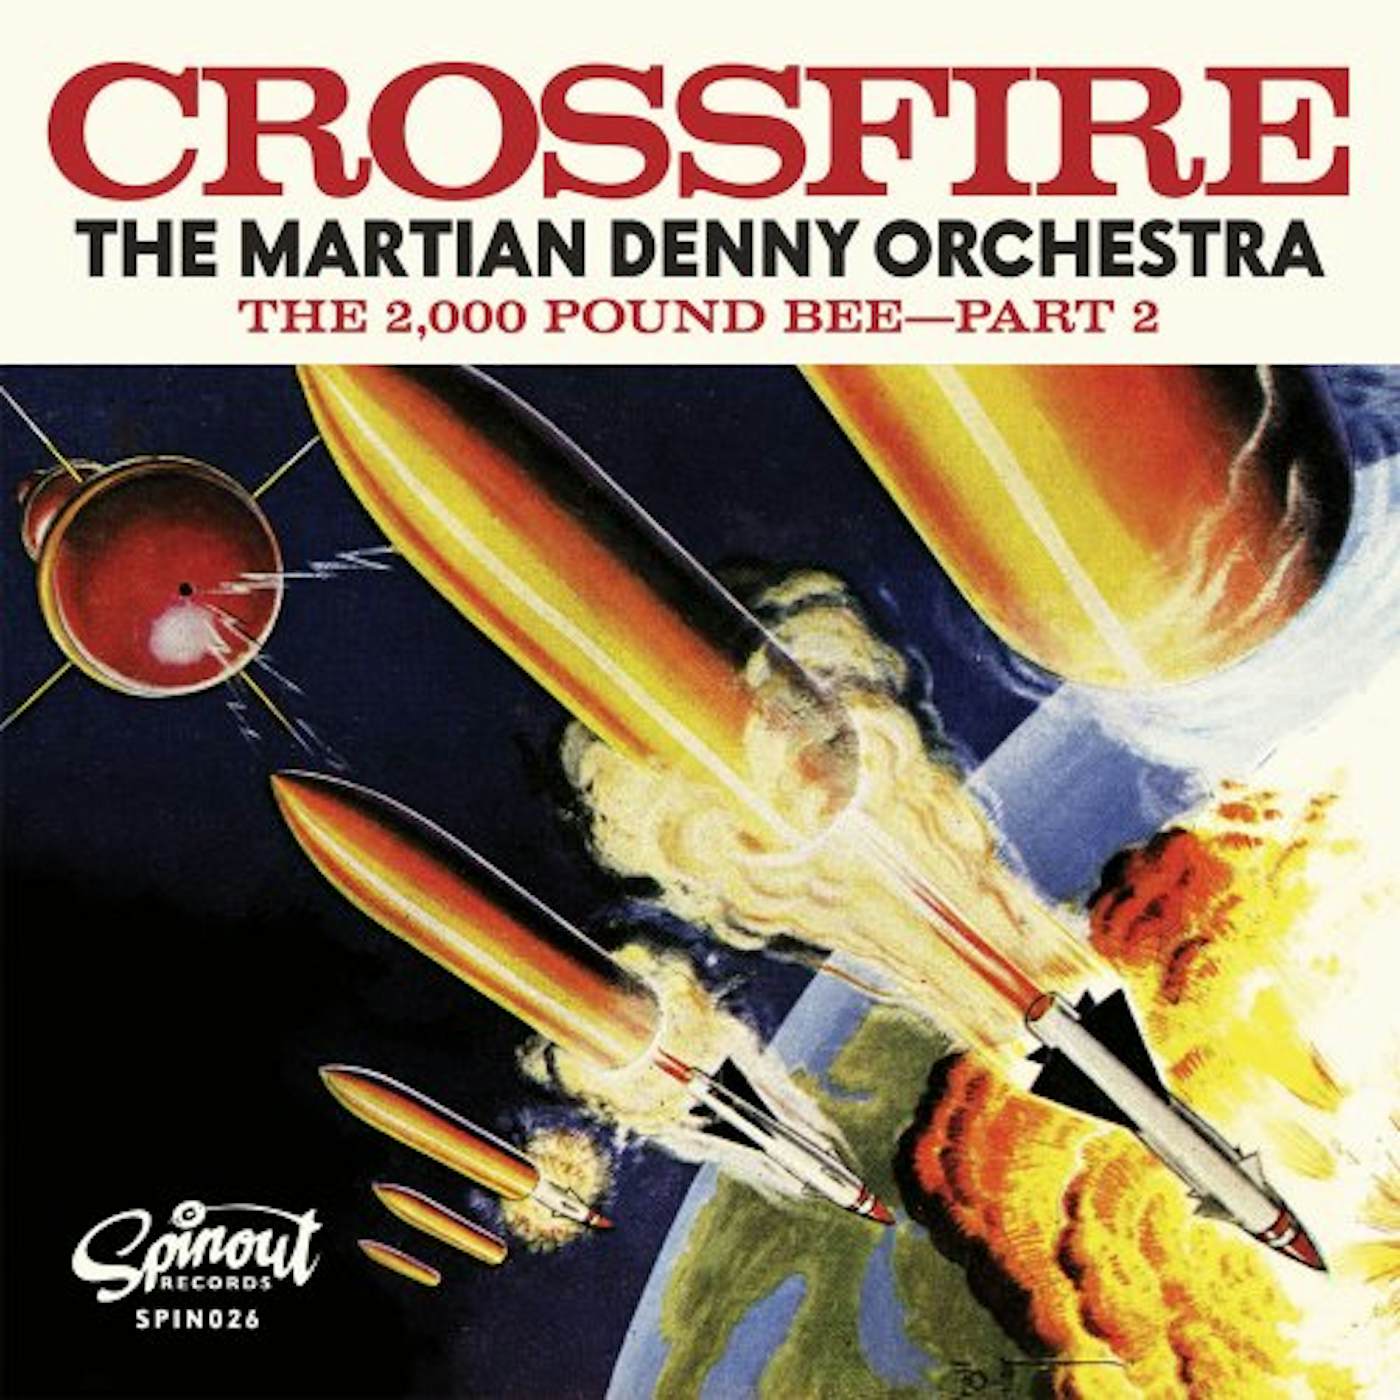 The Martian Denny Orchestra CROSSFIRE / 2000 POUND BEE - PART 2 Vinyl Record